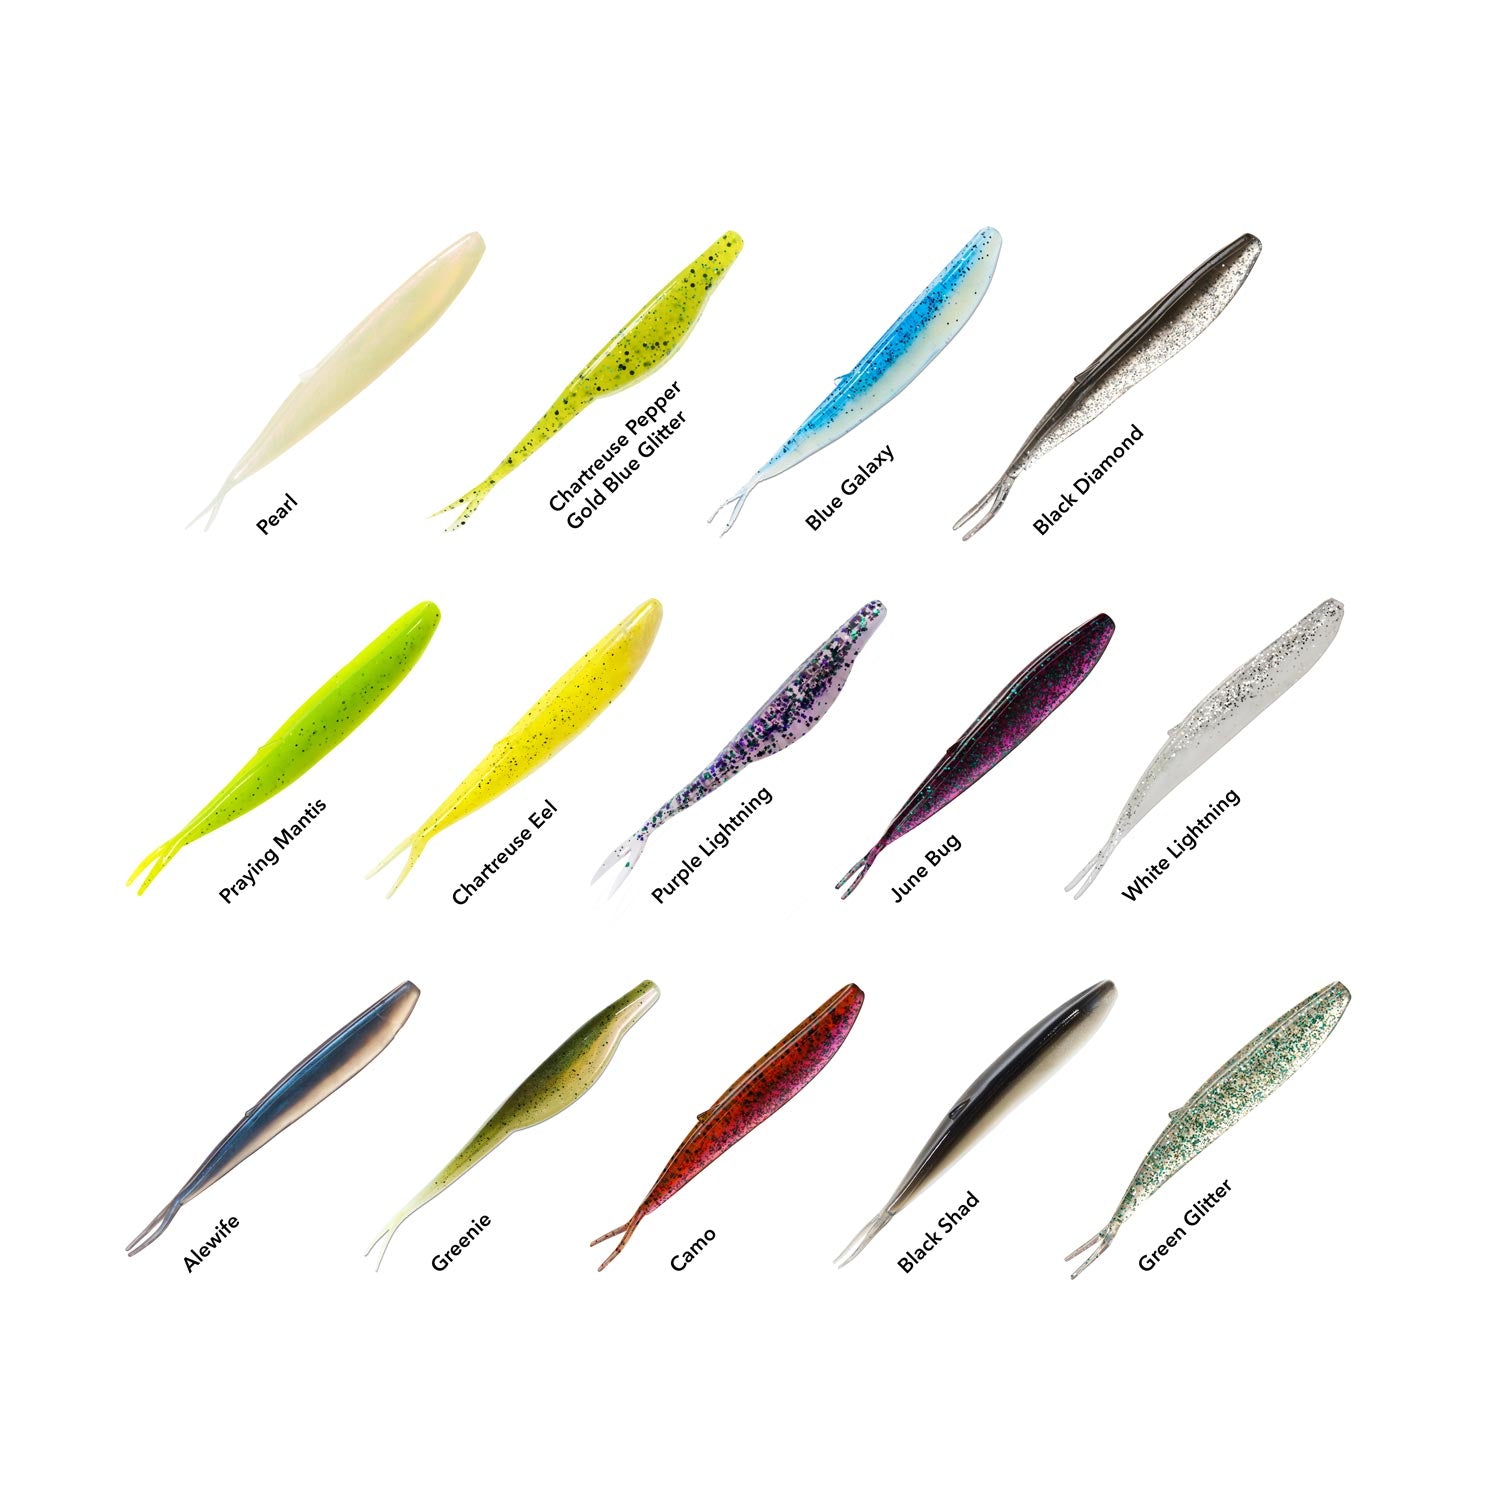 Charlie's Worms Lil' Baby scented soft bait colors